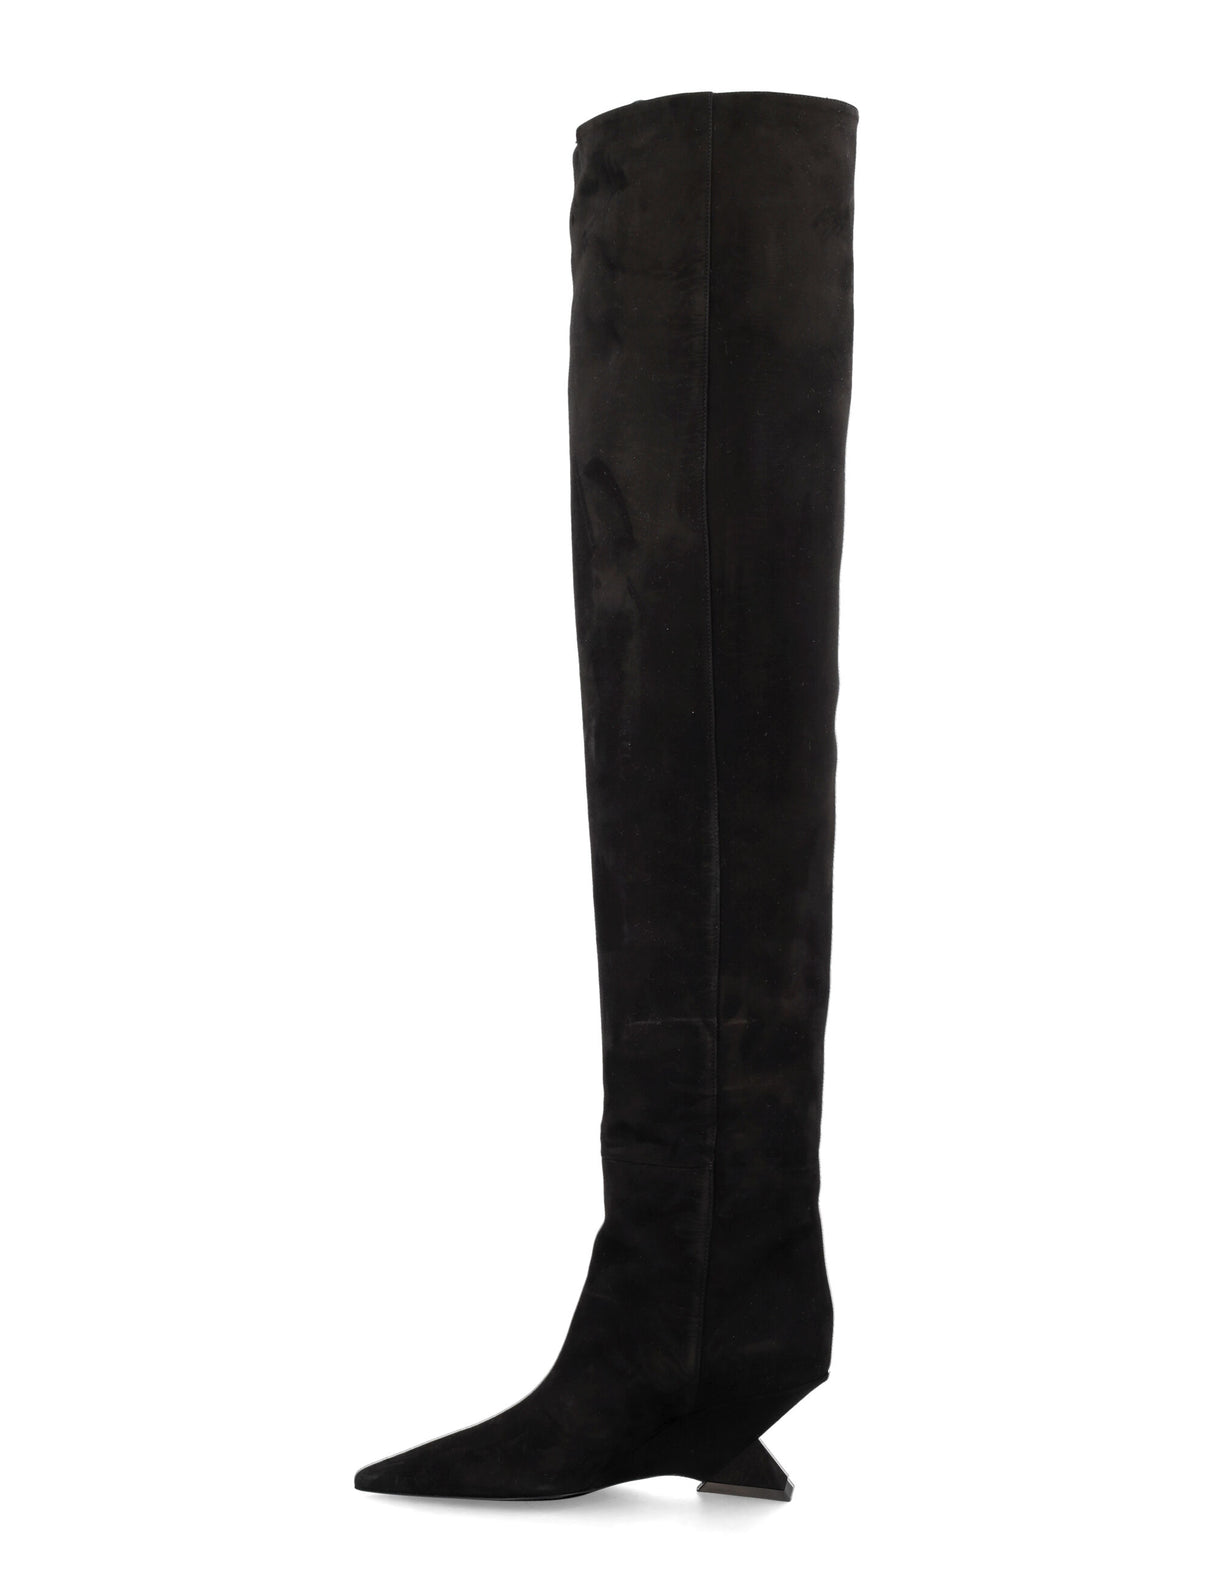 THE ATTICO Stylish and Sleek Over-Knee Boots for Women